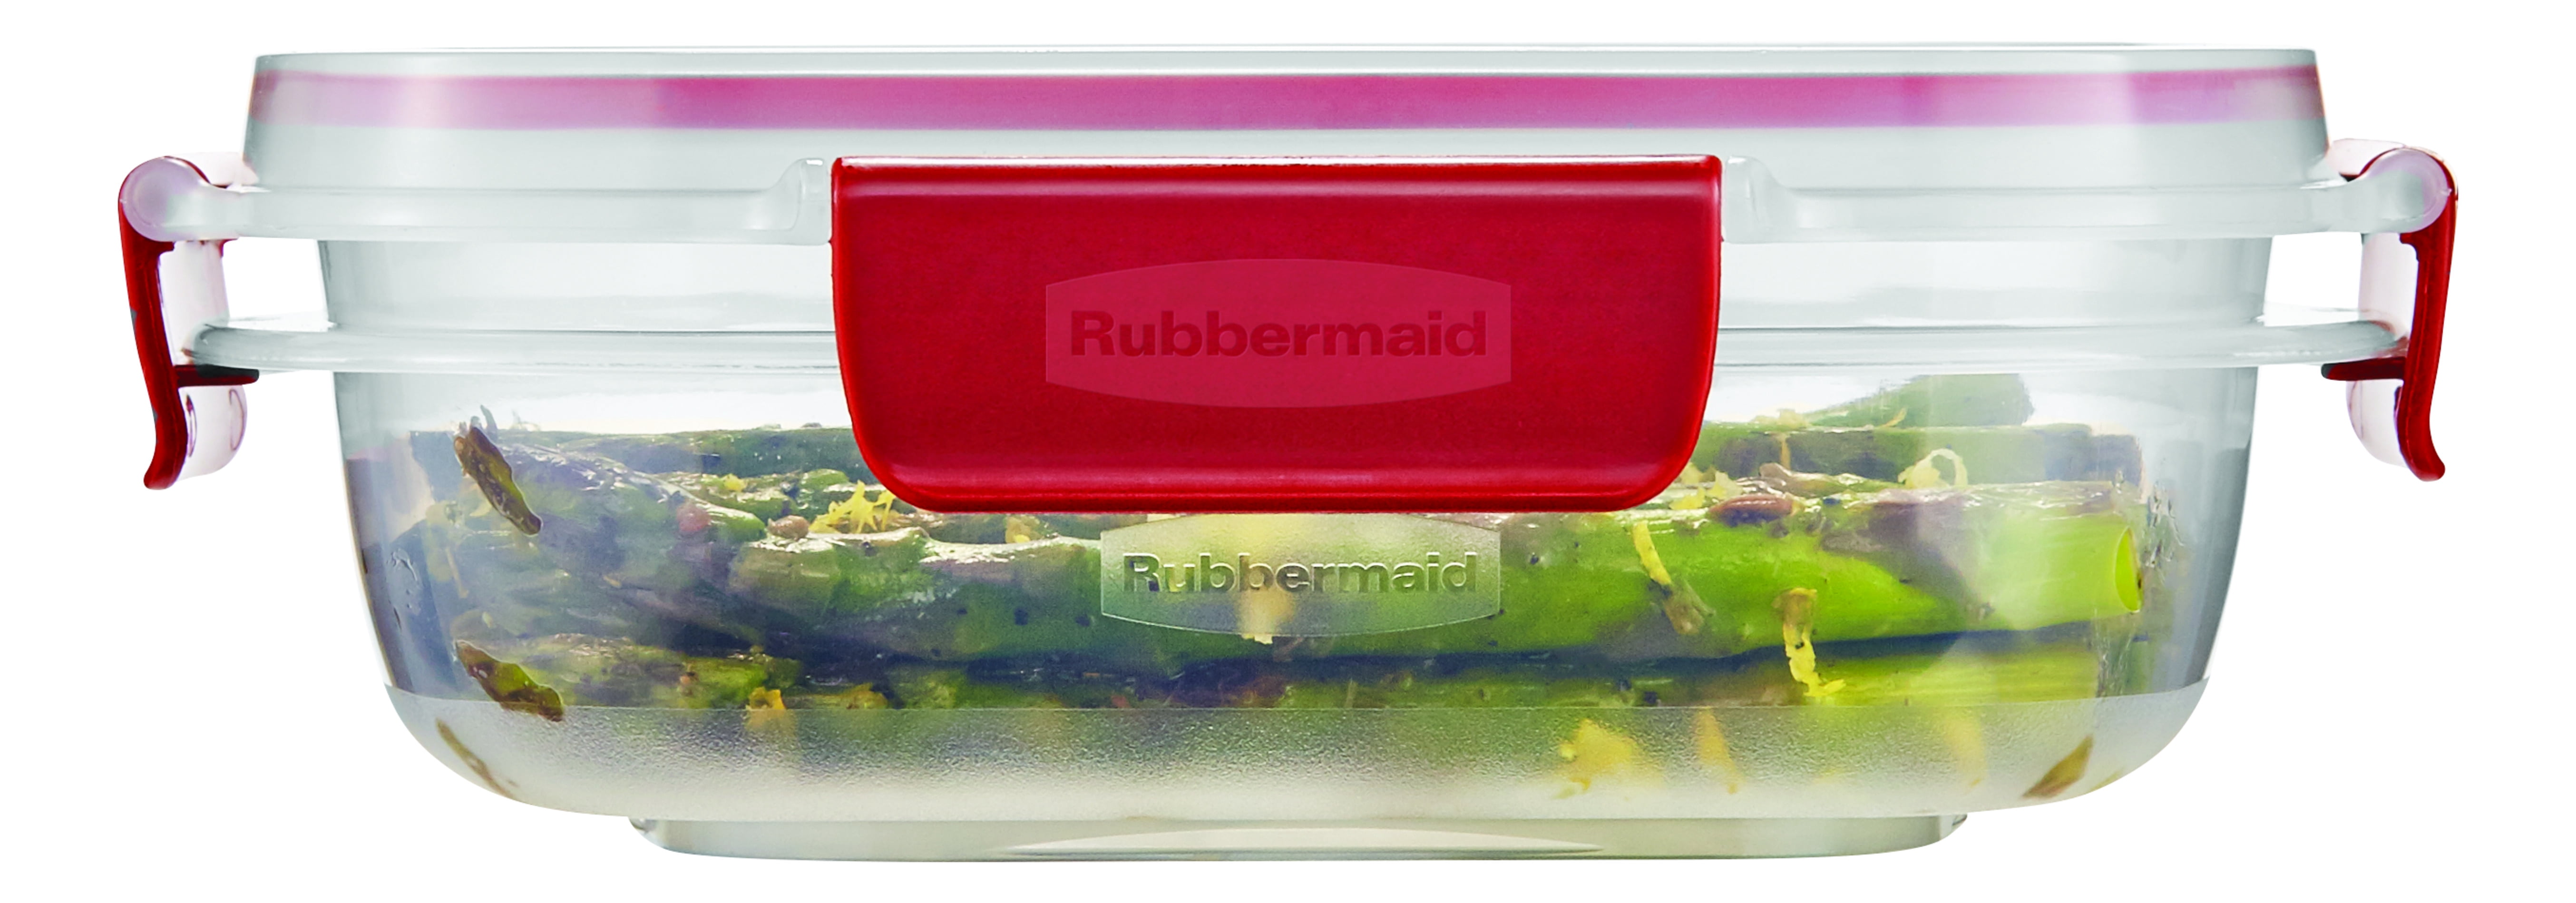 Rubbermaid Easy Find Lids Tabs Food Storage Container, 16-Piece